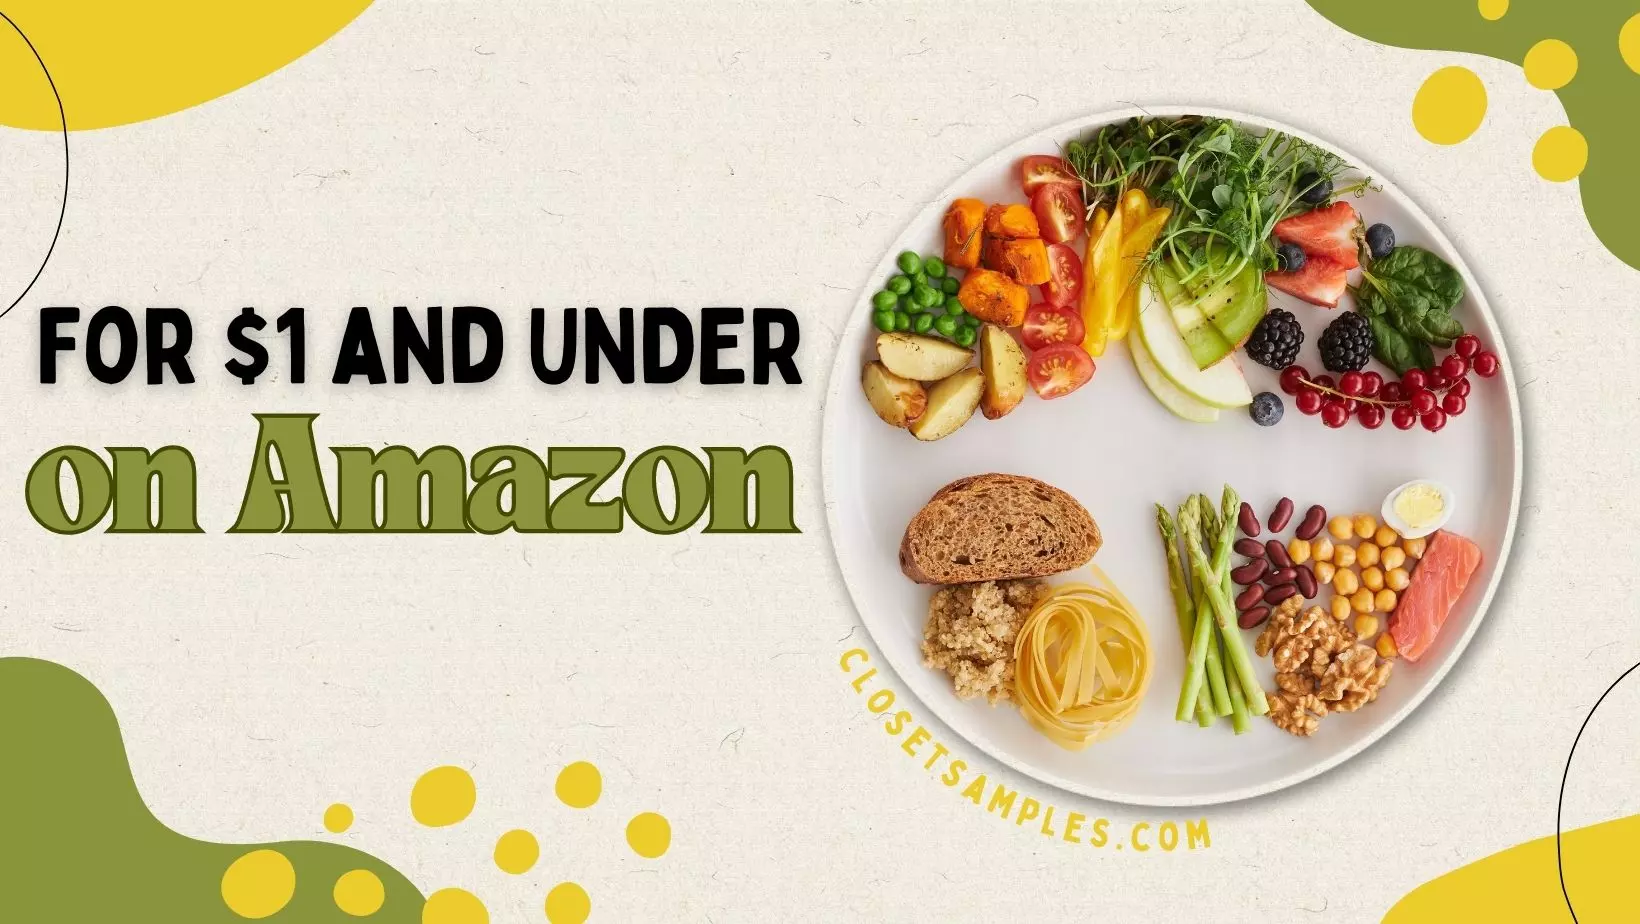 Food 1 and UNDER on Amazon closetsamples